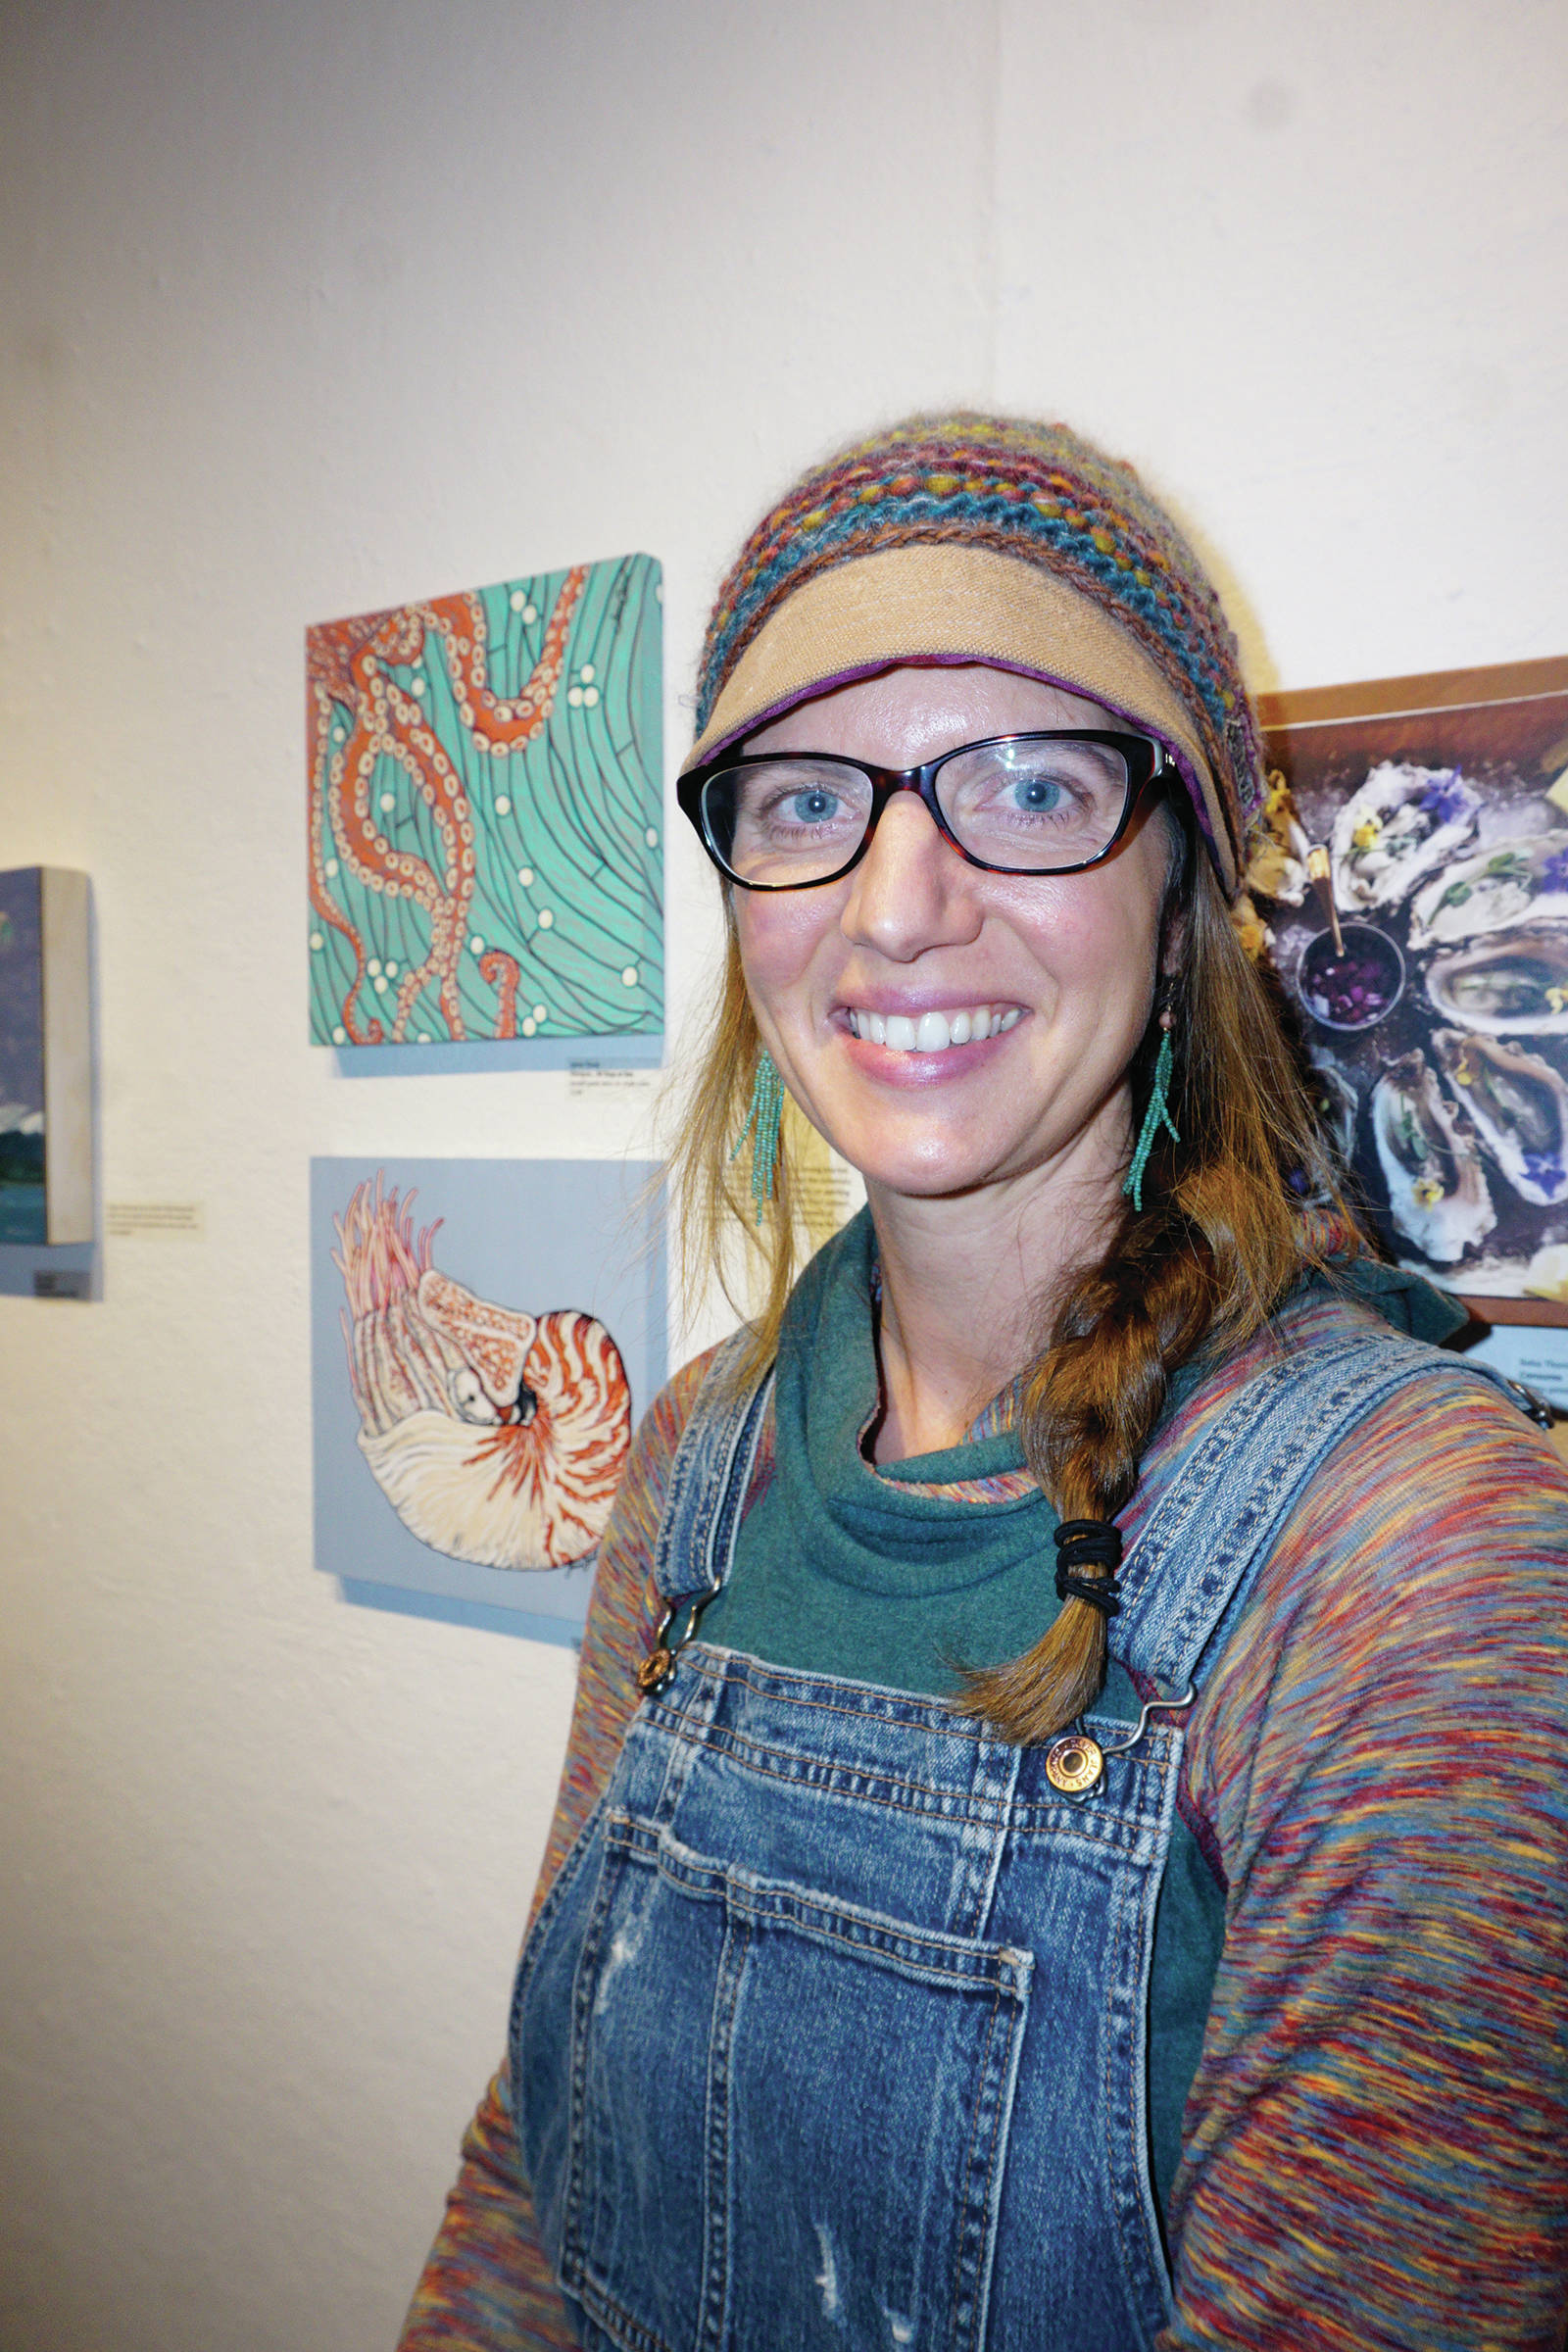 Jamie Cloud poses next to her paintings, some of the works of art in the 10x10 show at Bunnell Street Arts Center that opened on Nov. 8, 2019, in Homer, Alaska. (Photo by Michael Armstrong/Homer News)